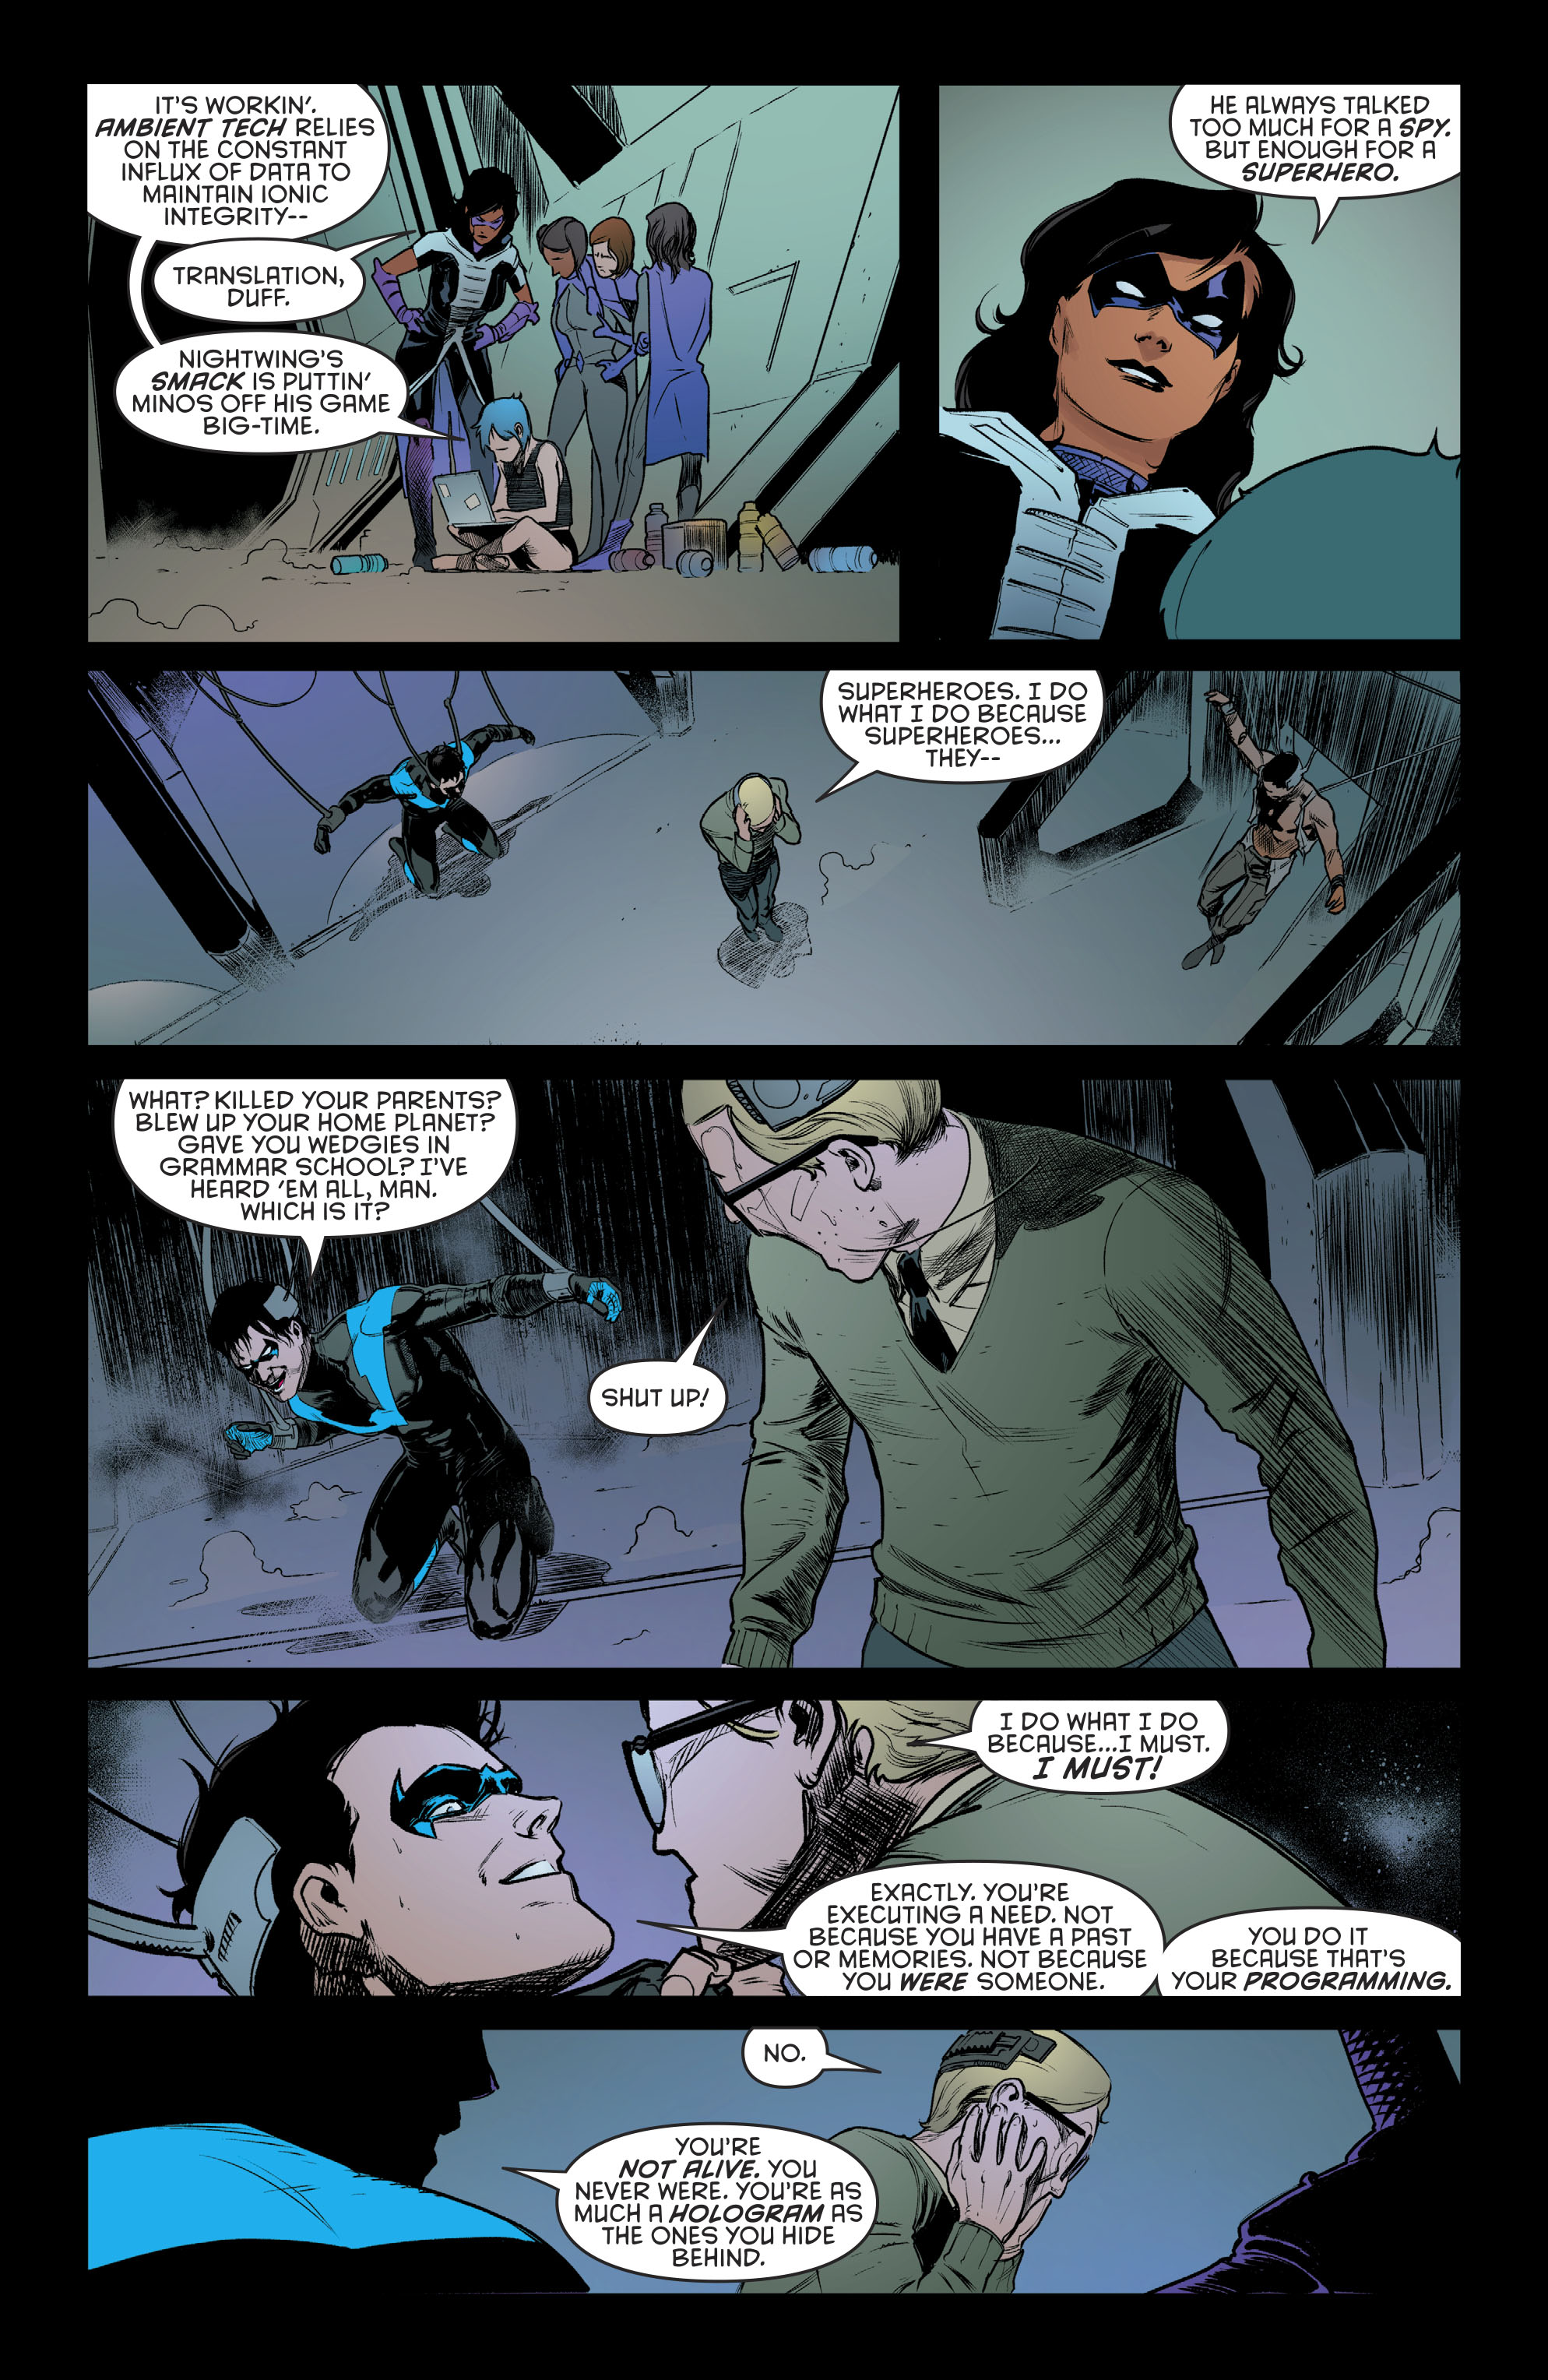 Nightwing 2016 Chapter 28 Page 13